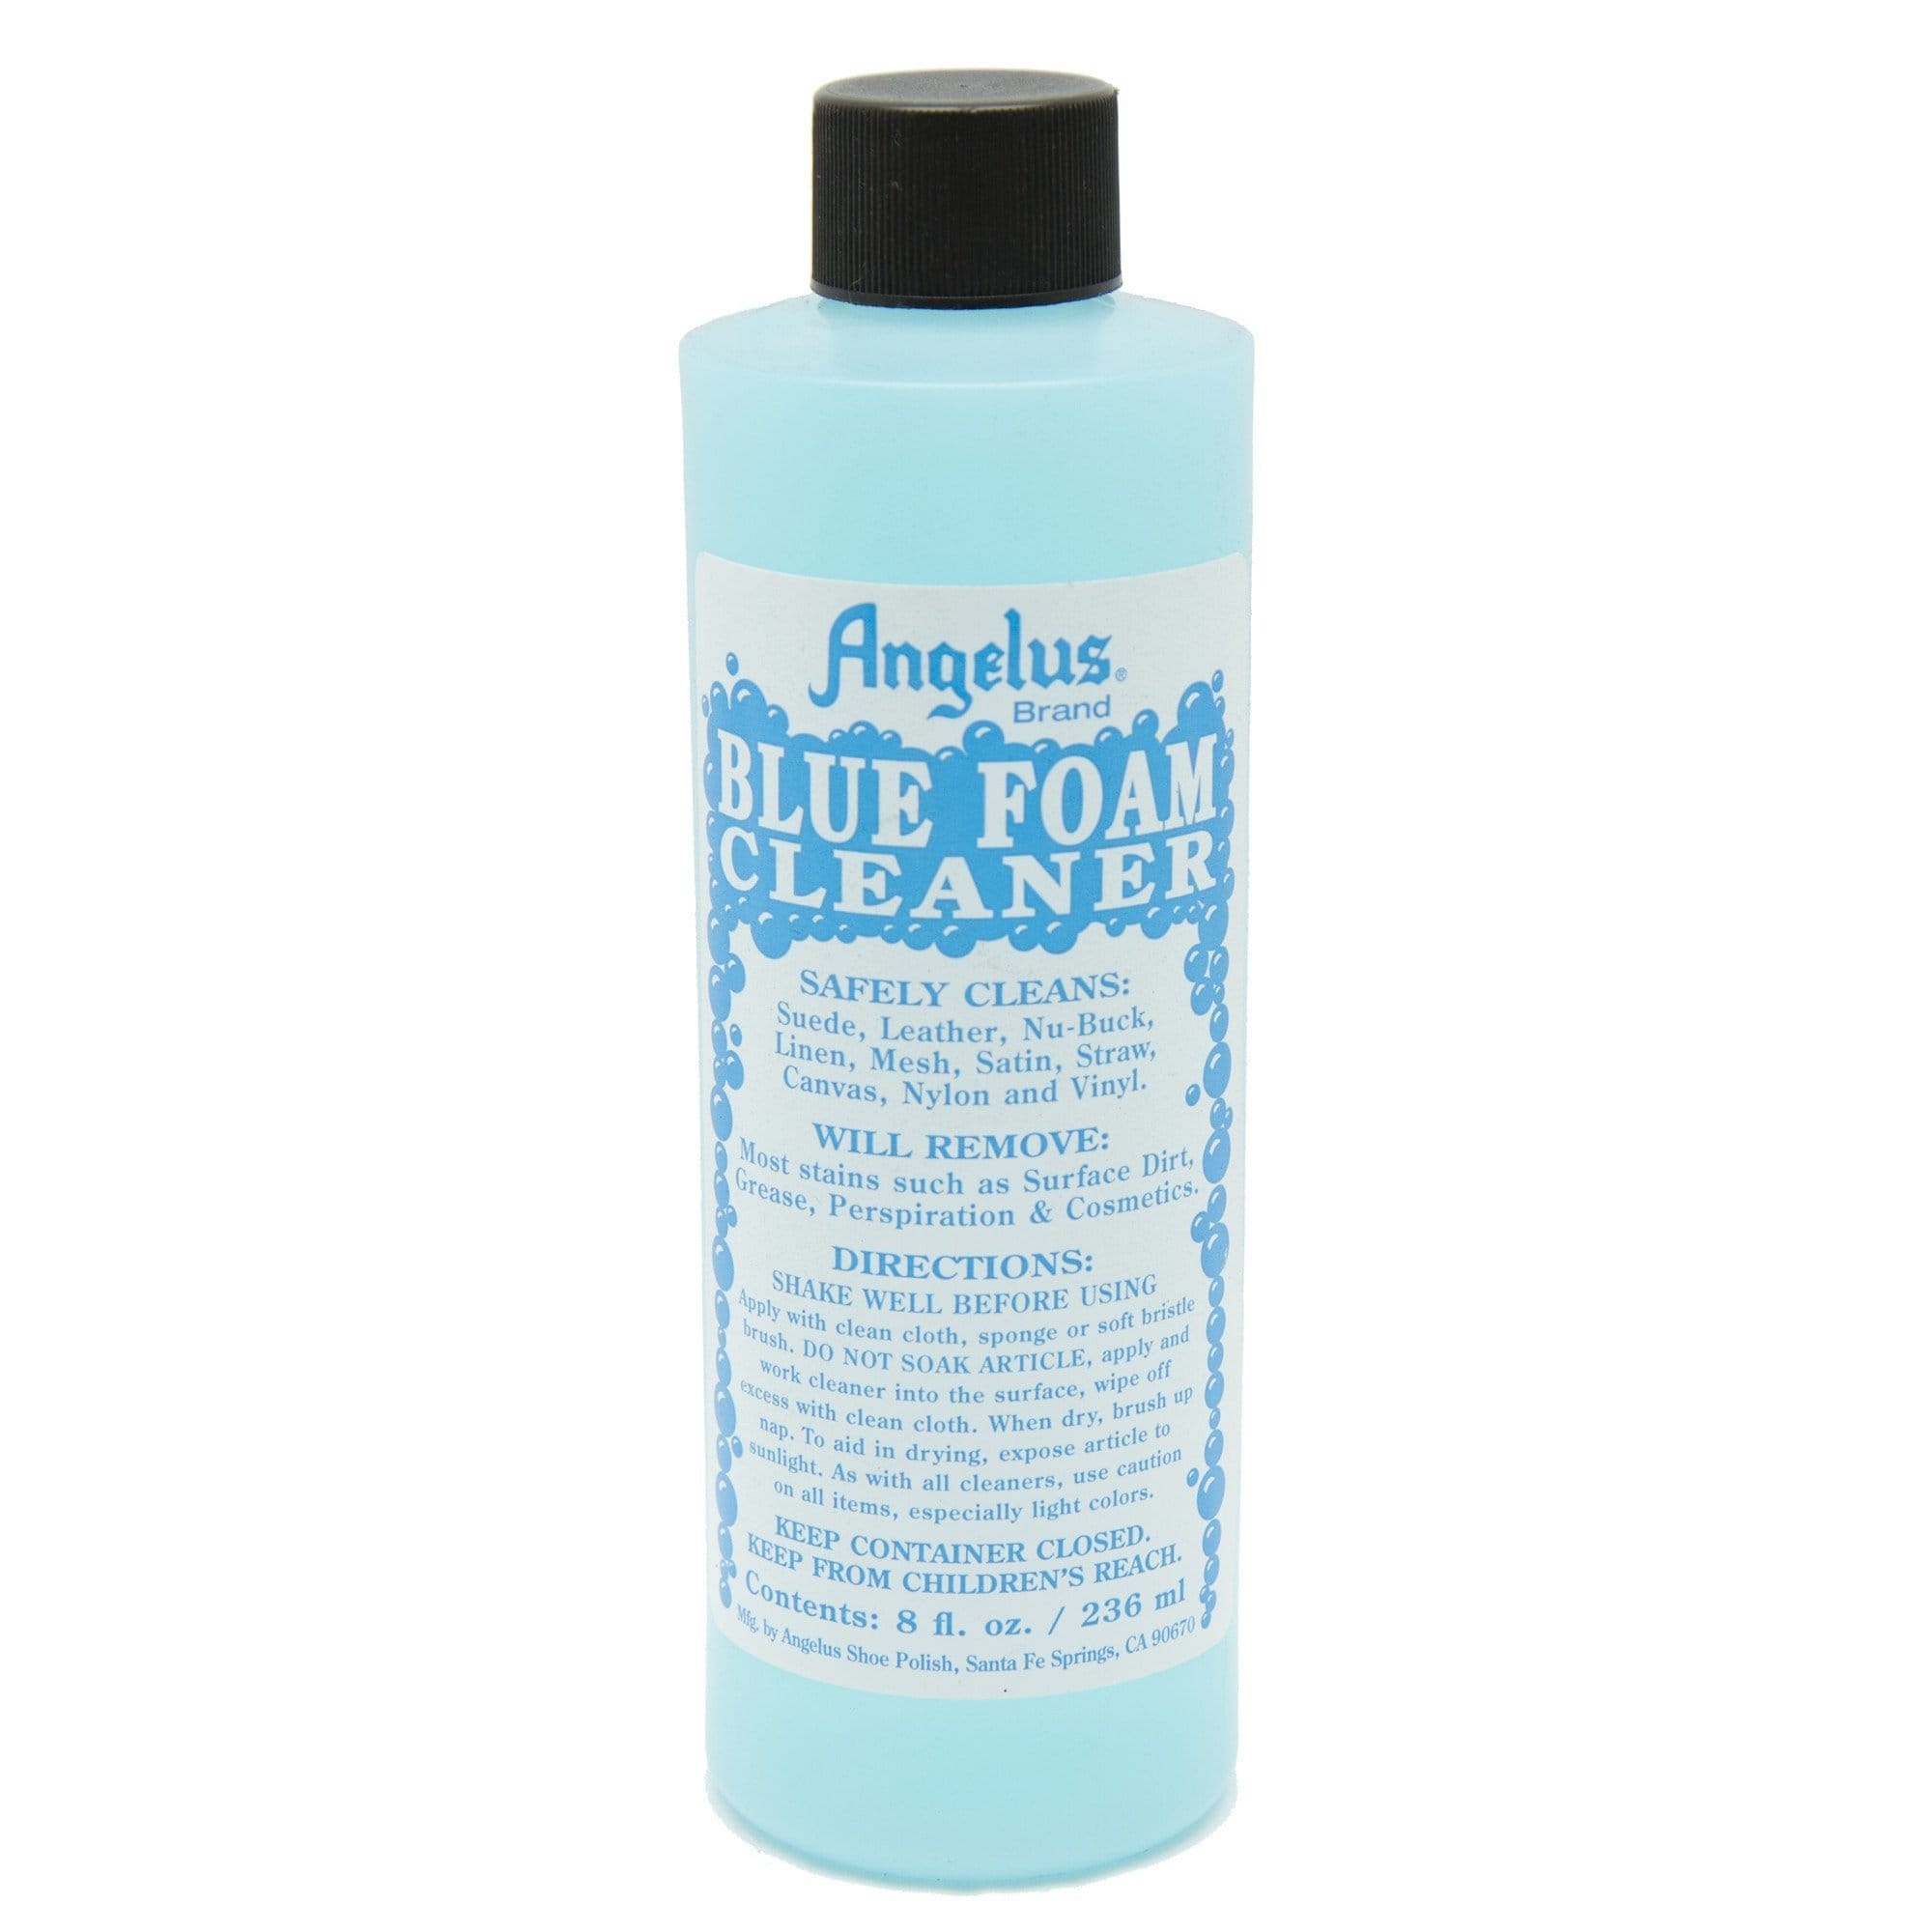 Angelus Blue Gel Boot and Shoe Cleaner - 225